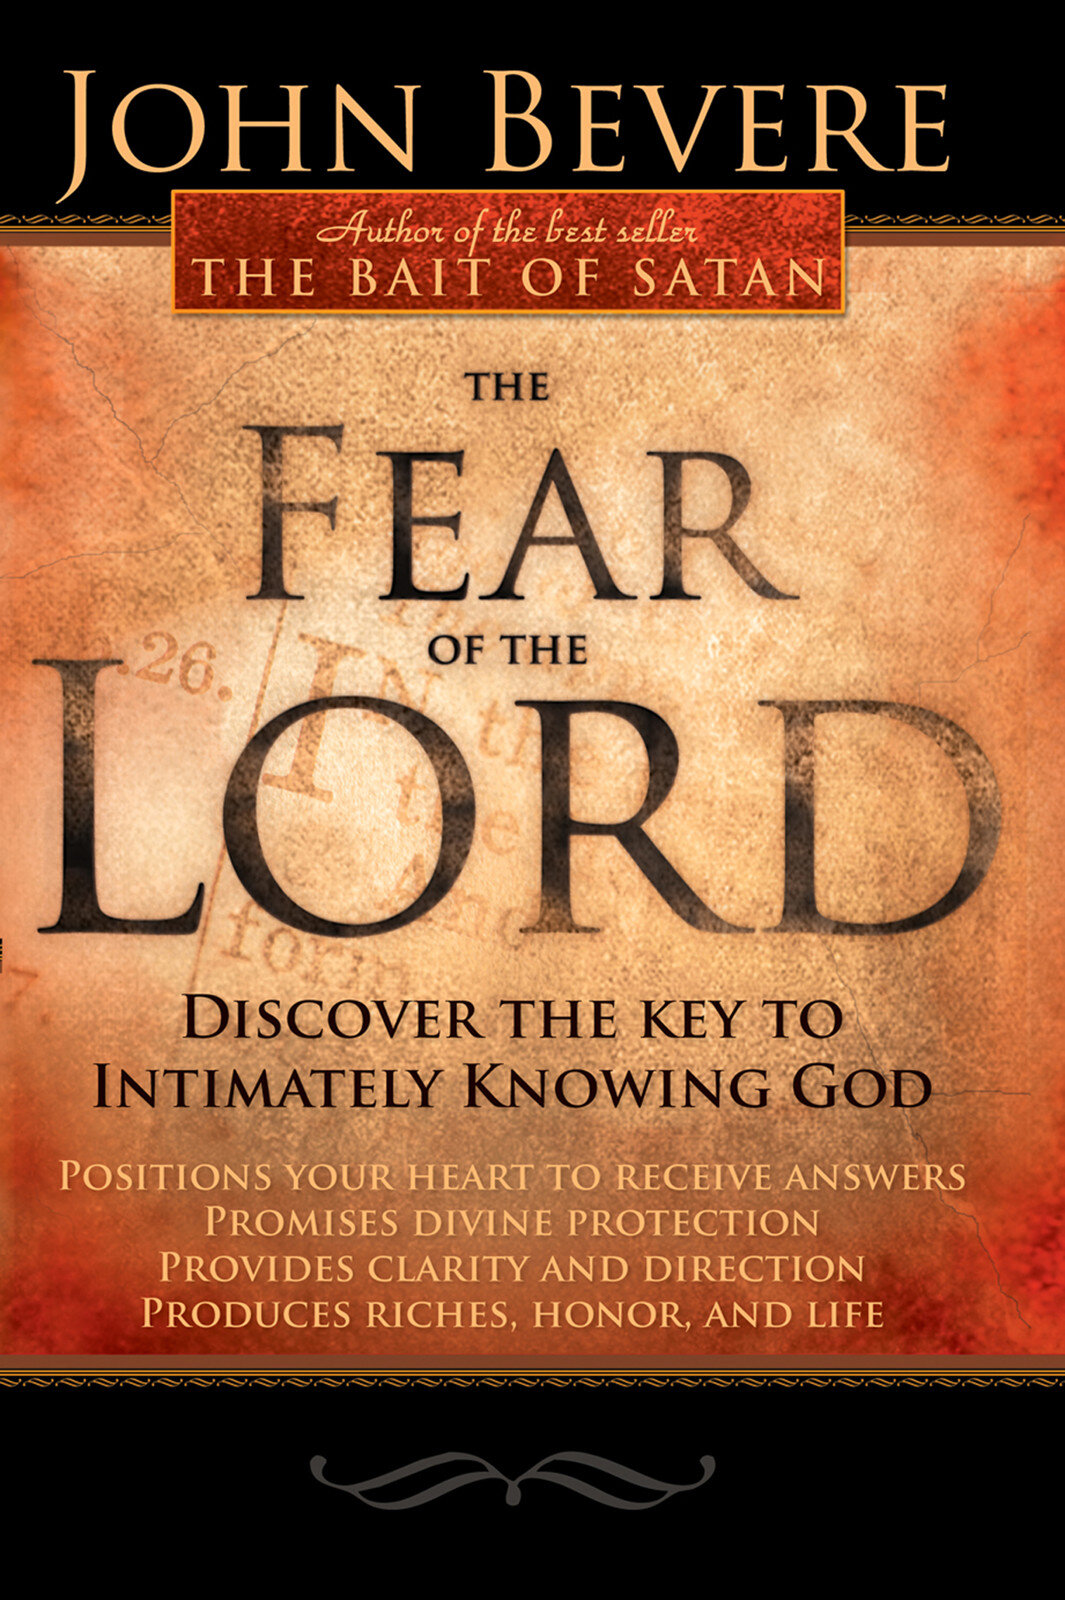 The Fear Of The Lord: Discover the Key to Intimately Knowing God